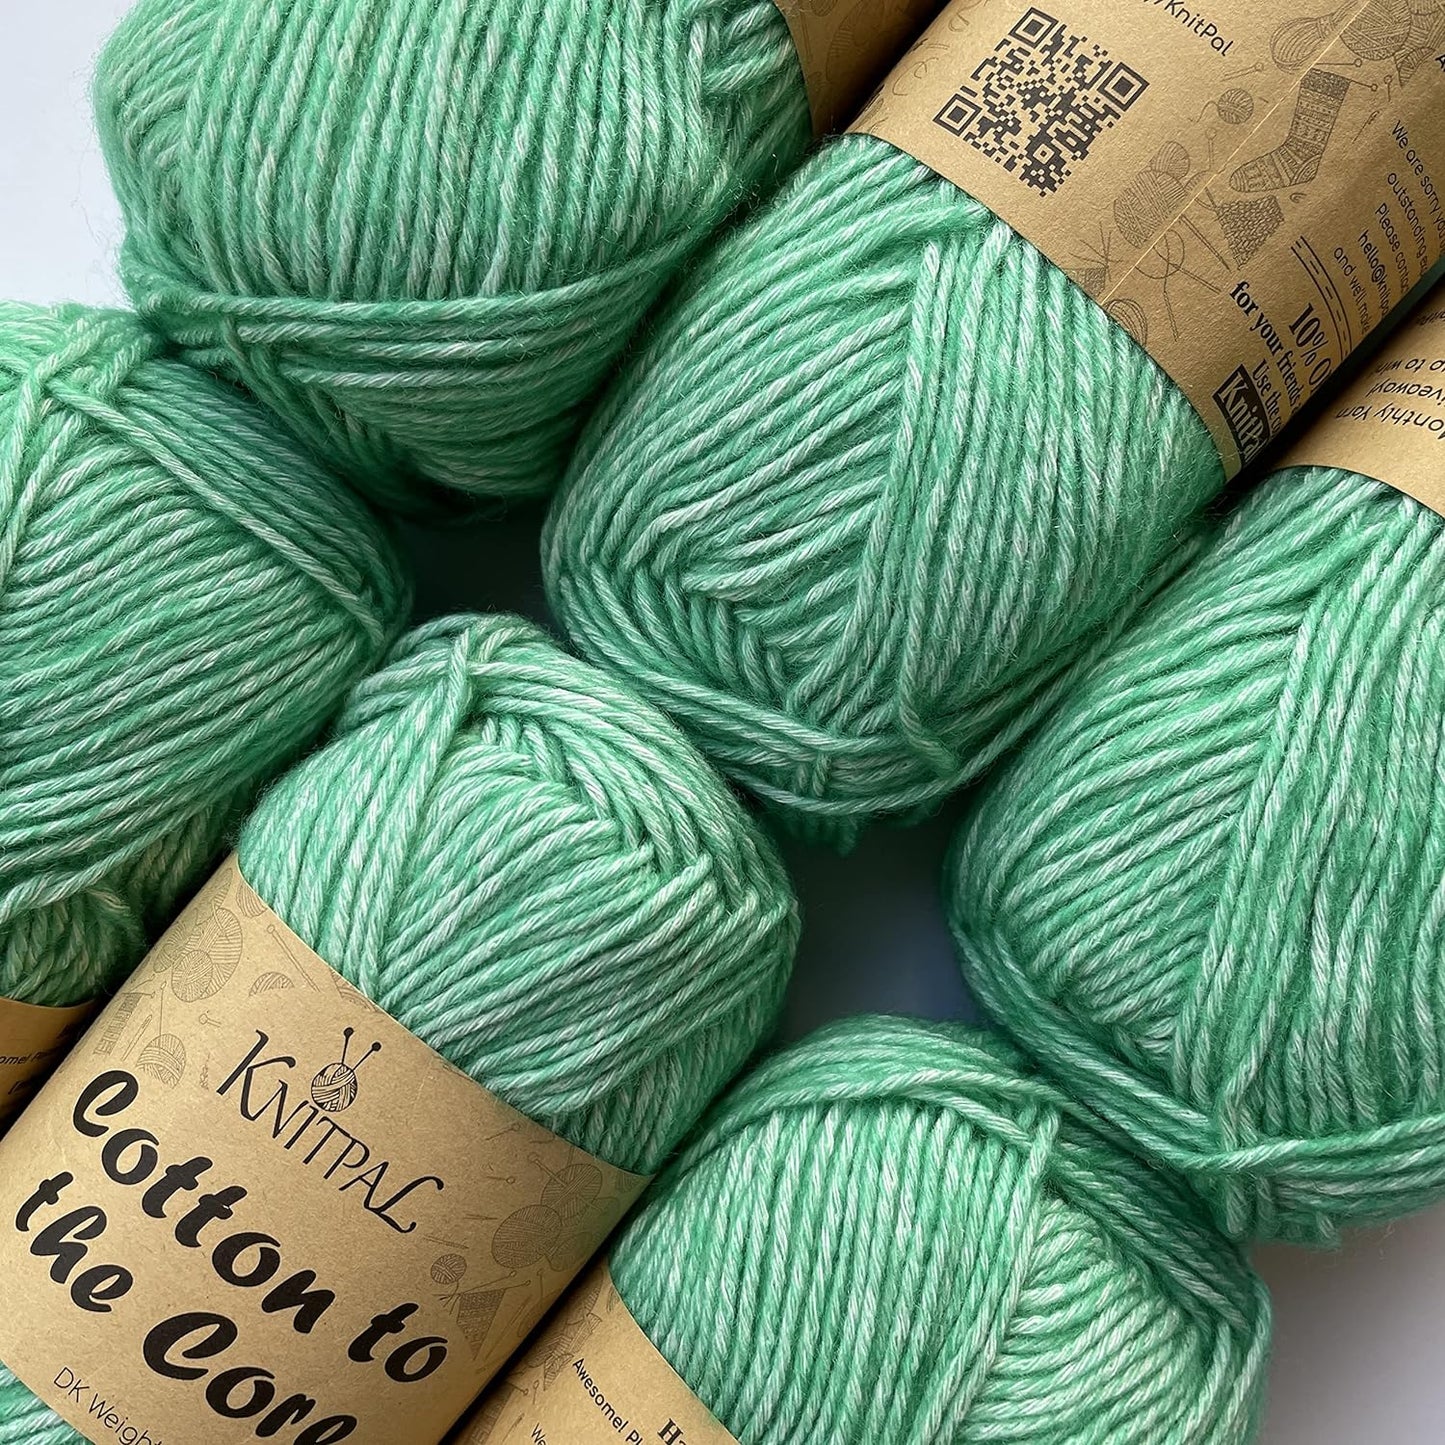 Cotton to the Core Soft Cotton Yarn for Crocheting, 78% Cotton and 22% Acrylic - Soft Baby Yarn for Crocheting - 3 DK Weight Cotton Yarn for Knitting - 6 Skeins, 852Yds/300G (Almond Tan)